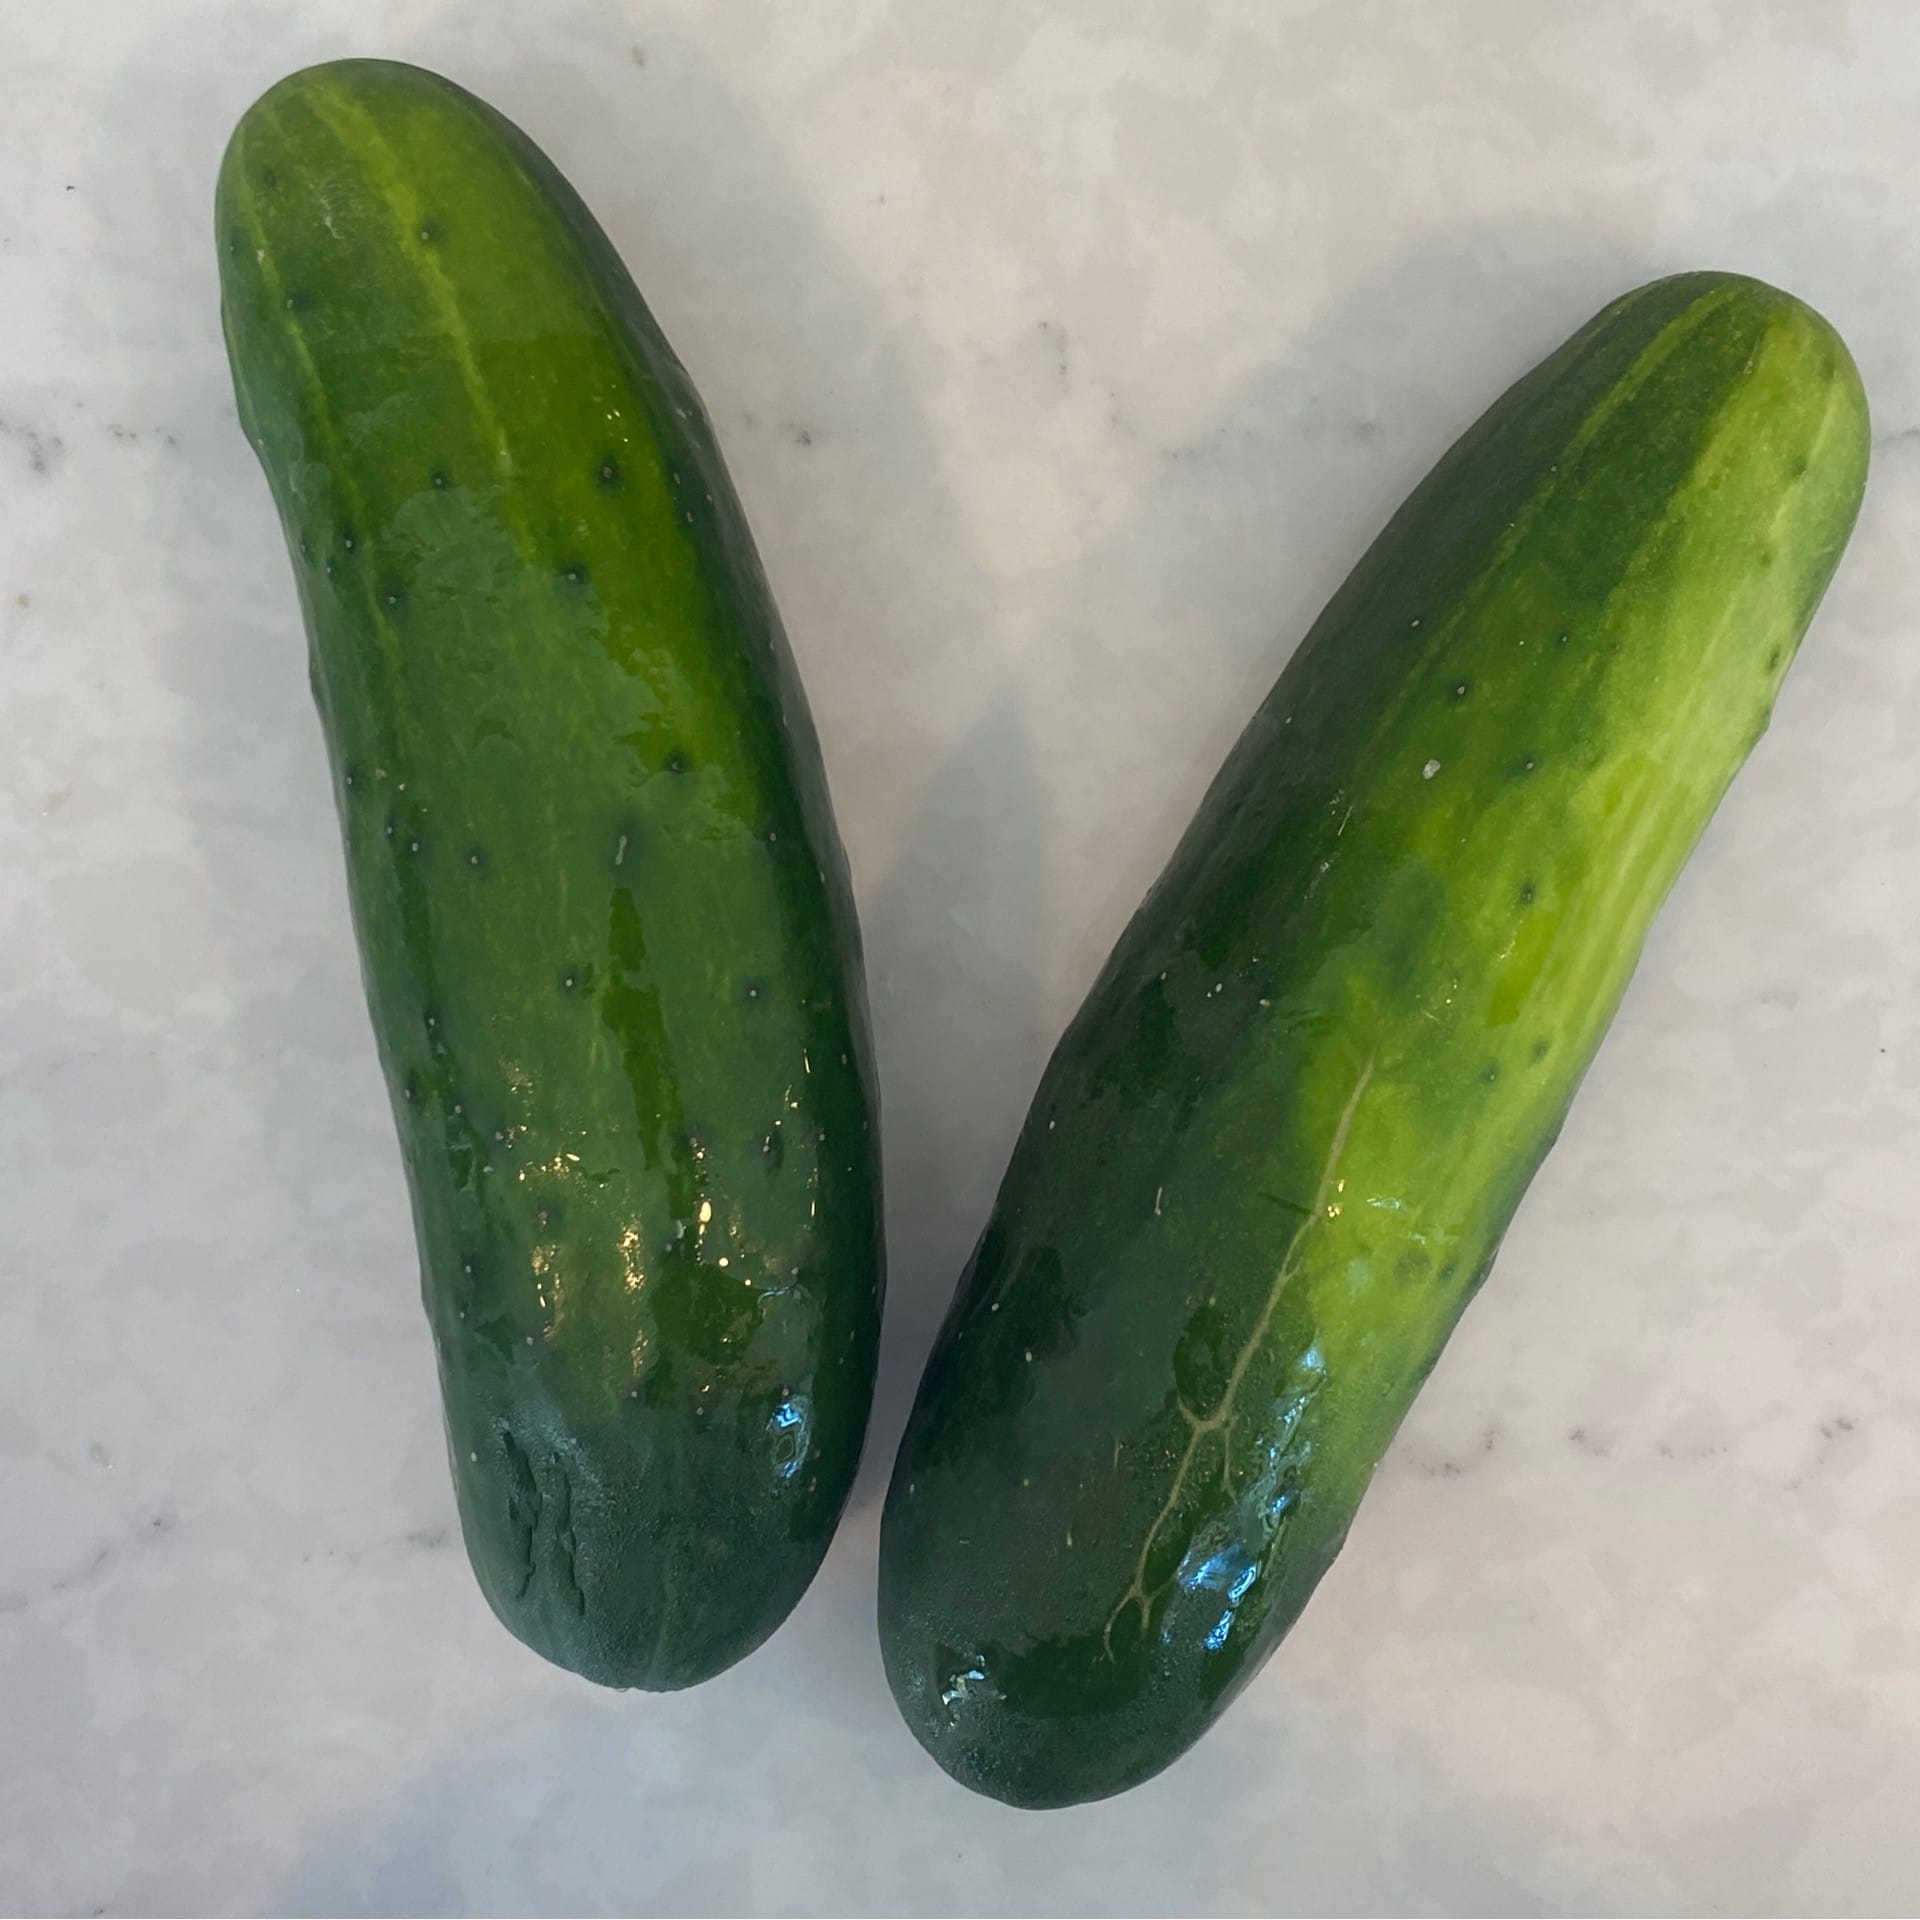 sold out cucumbers usda organic each